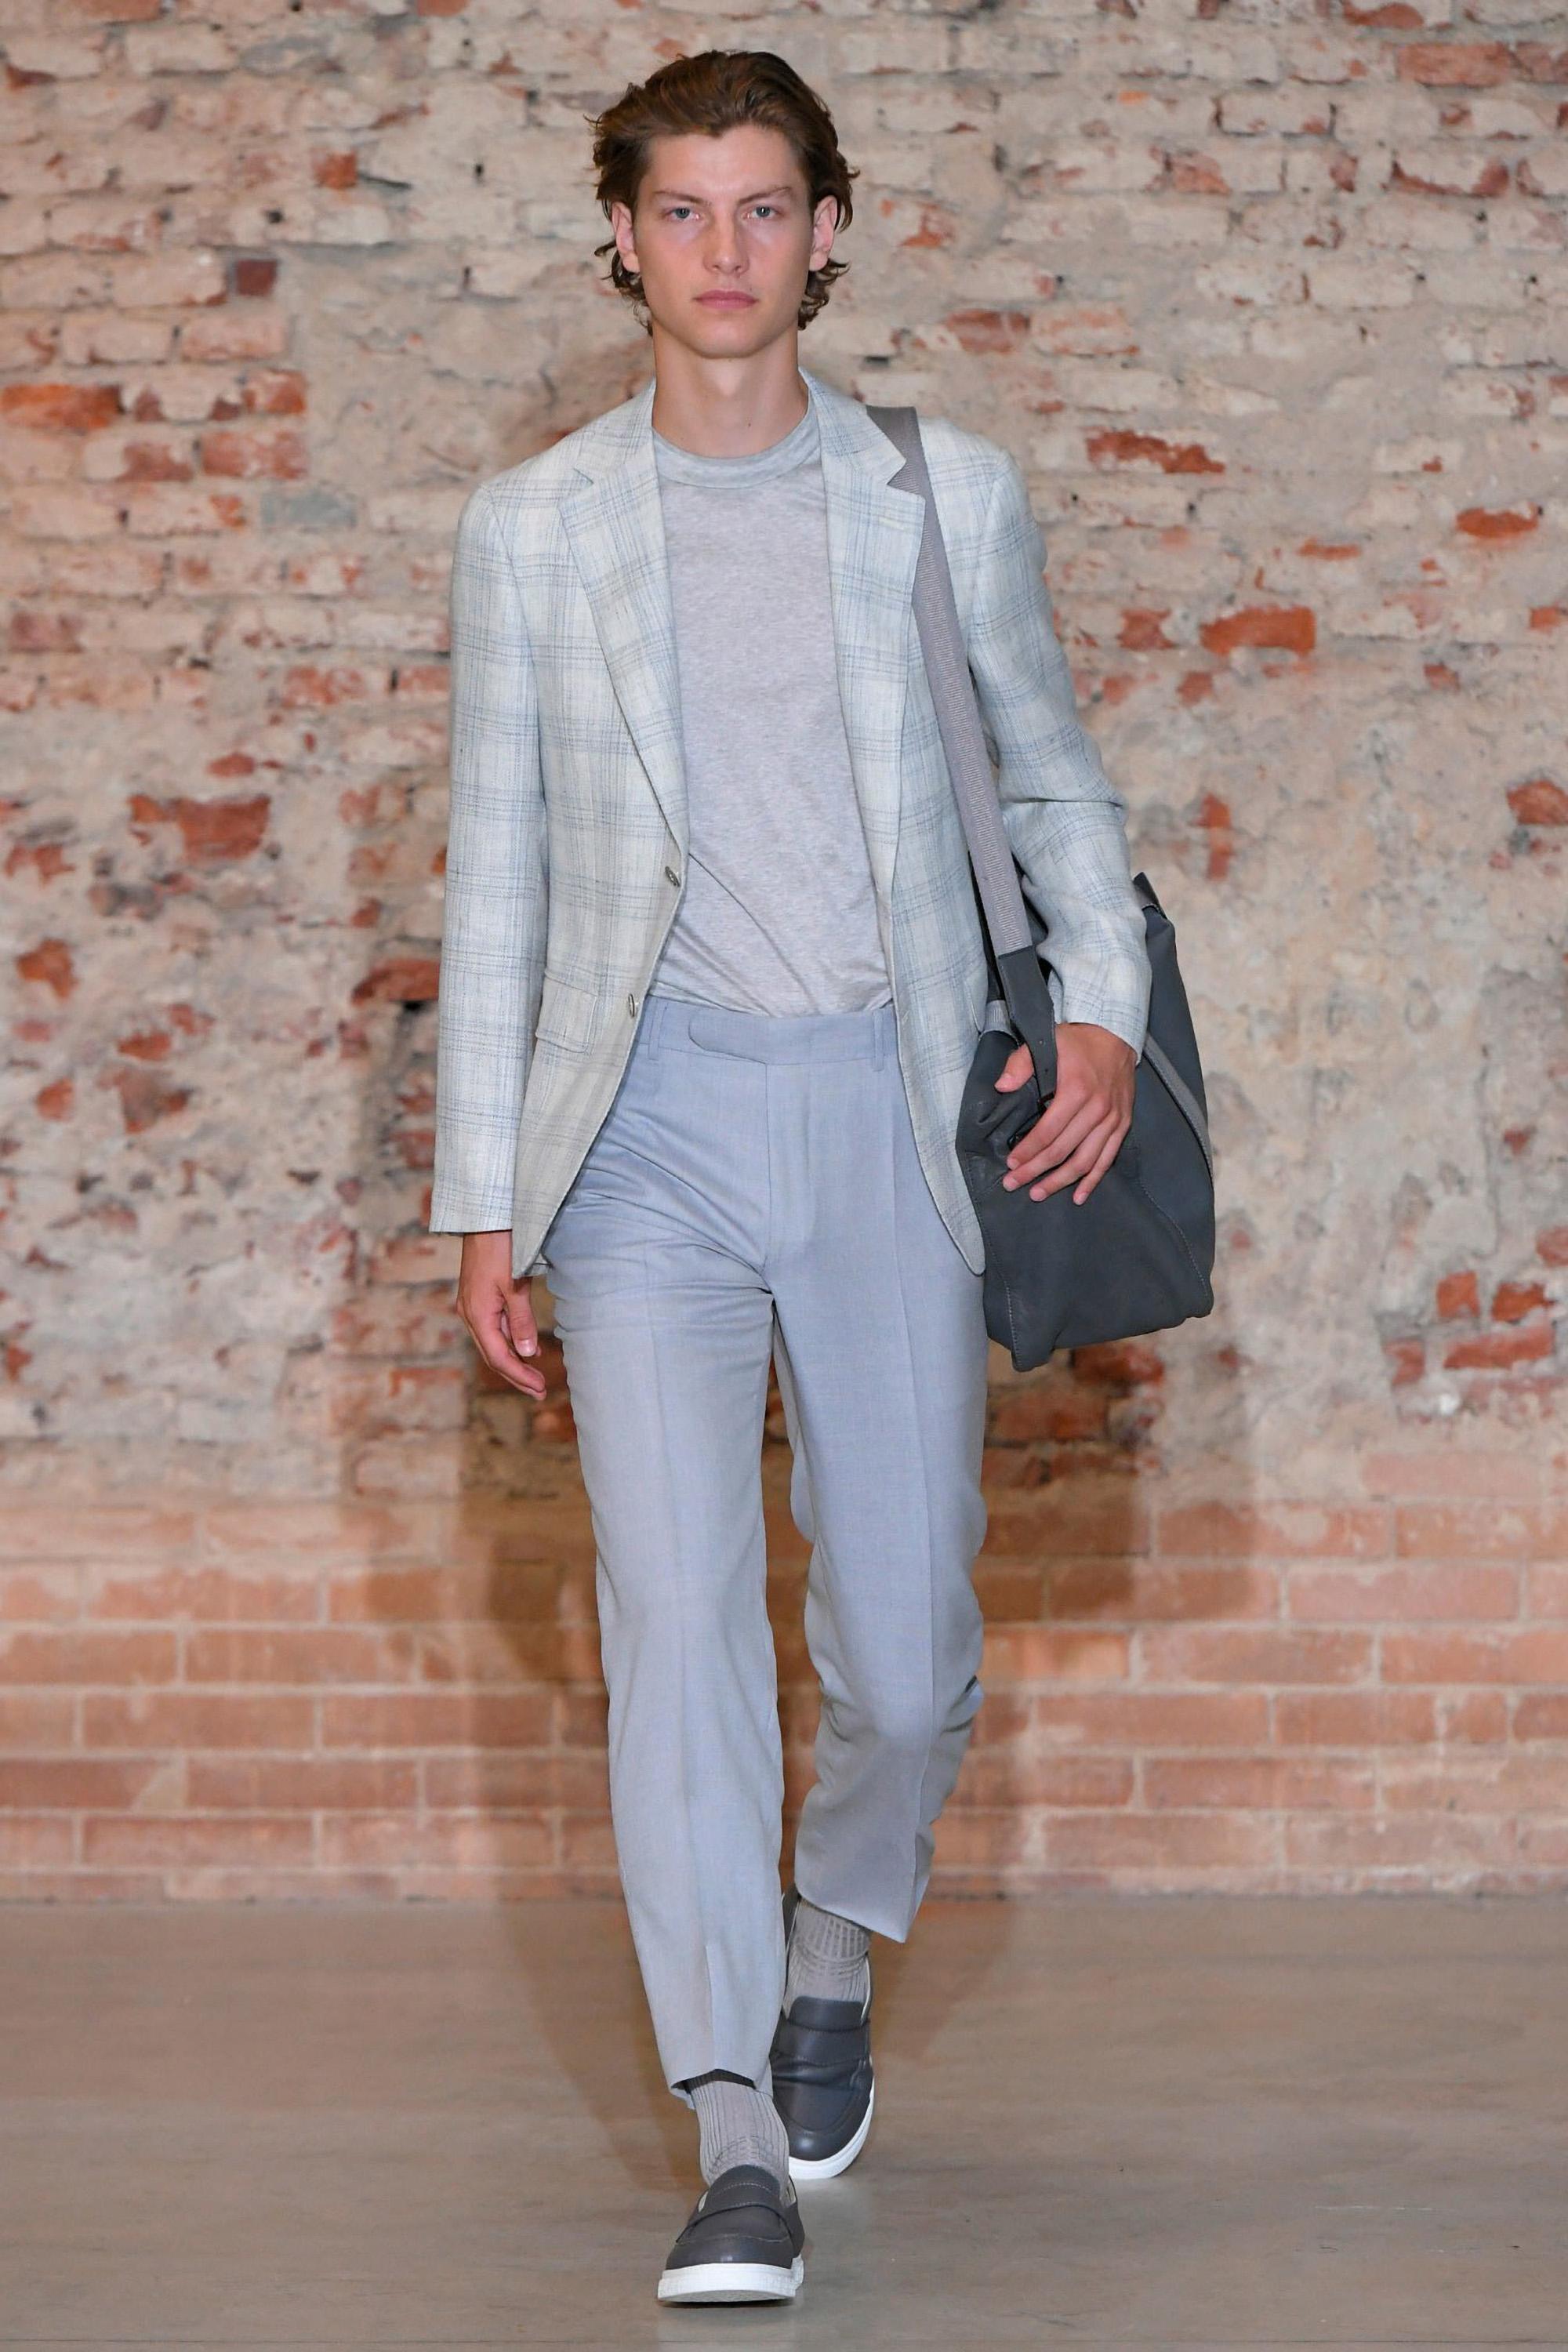 A look from Canali's Spring 2019